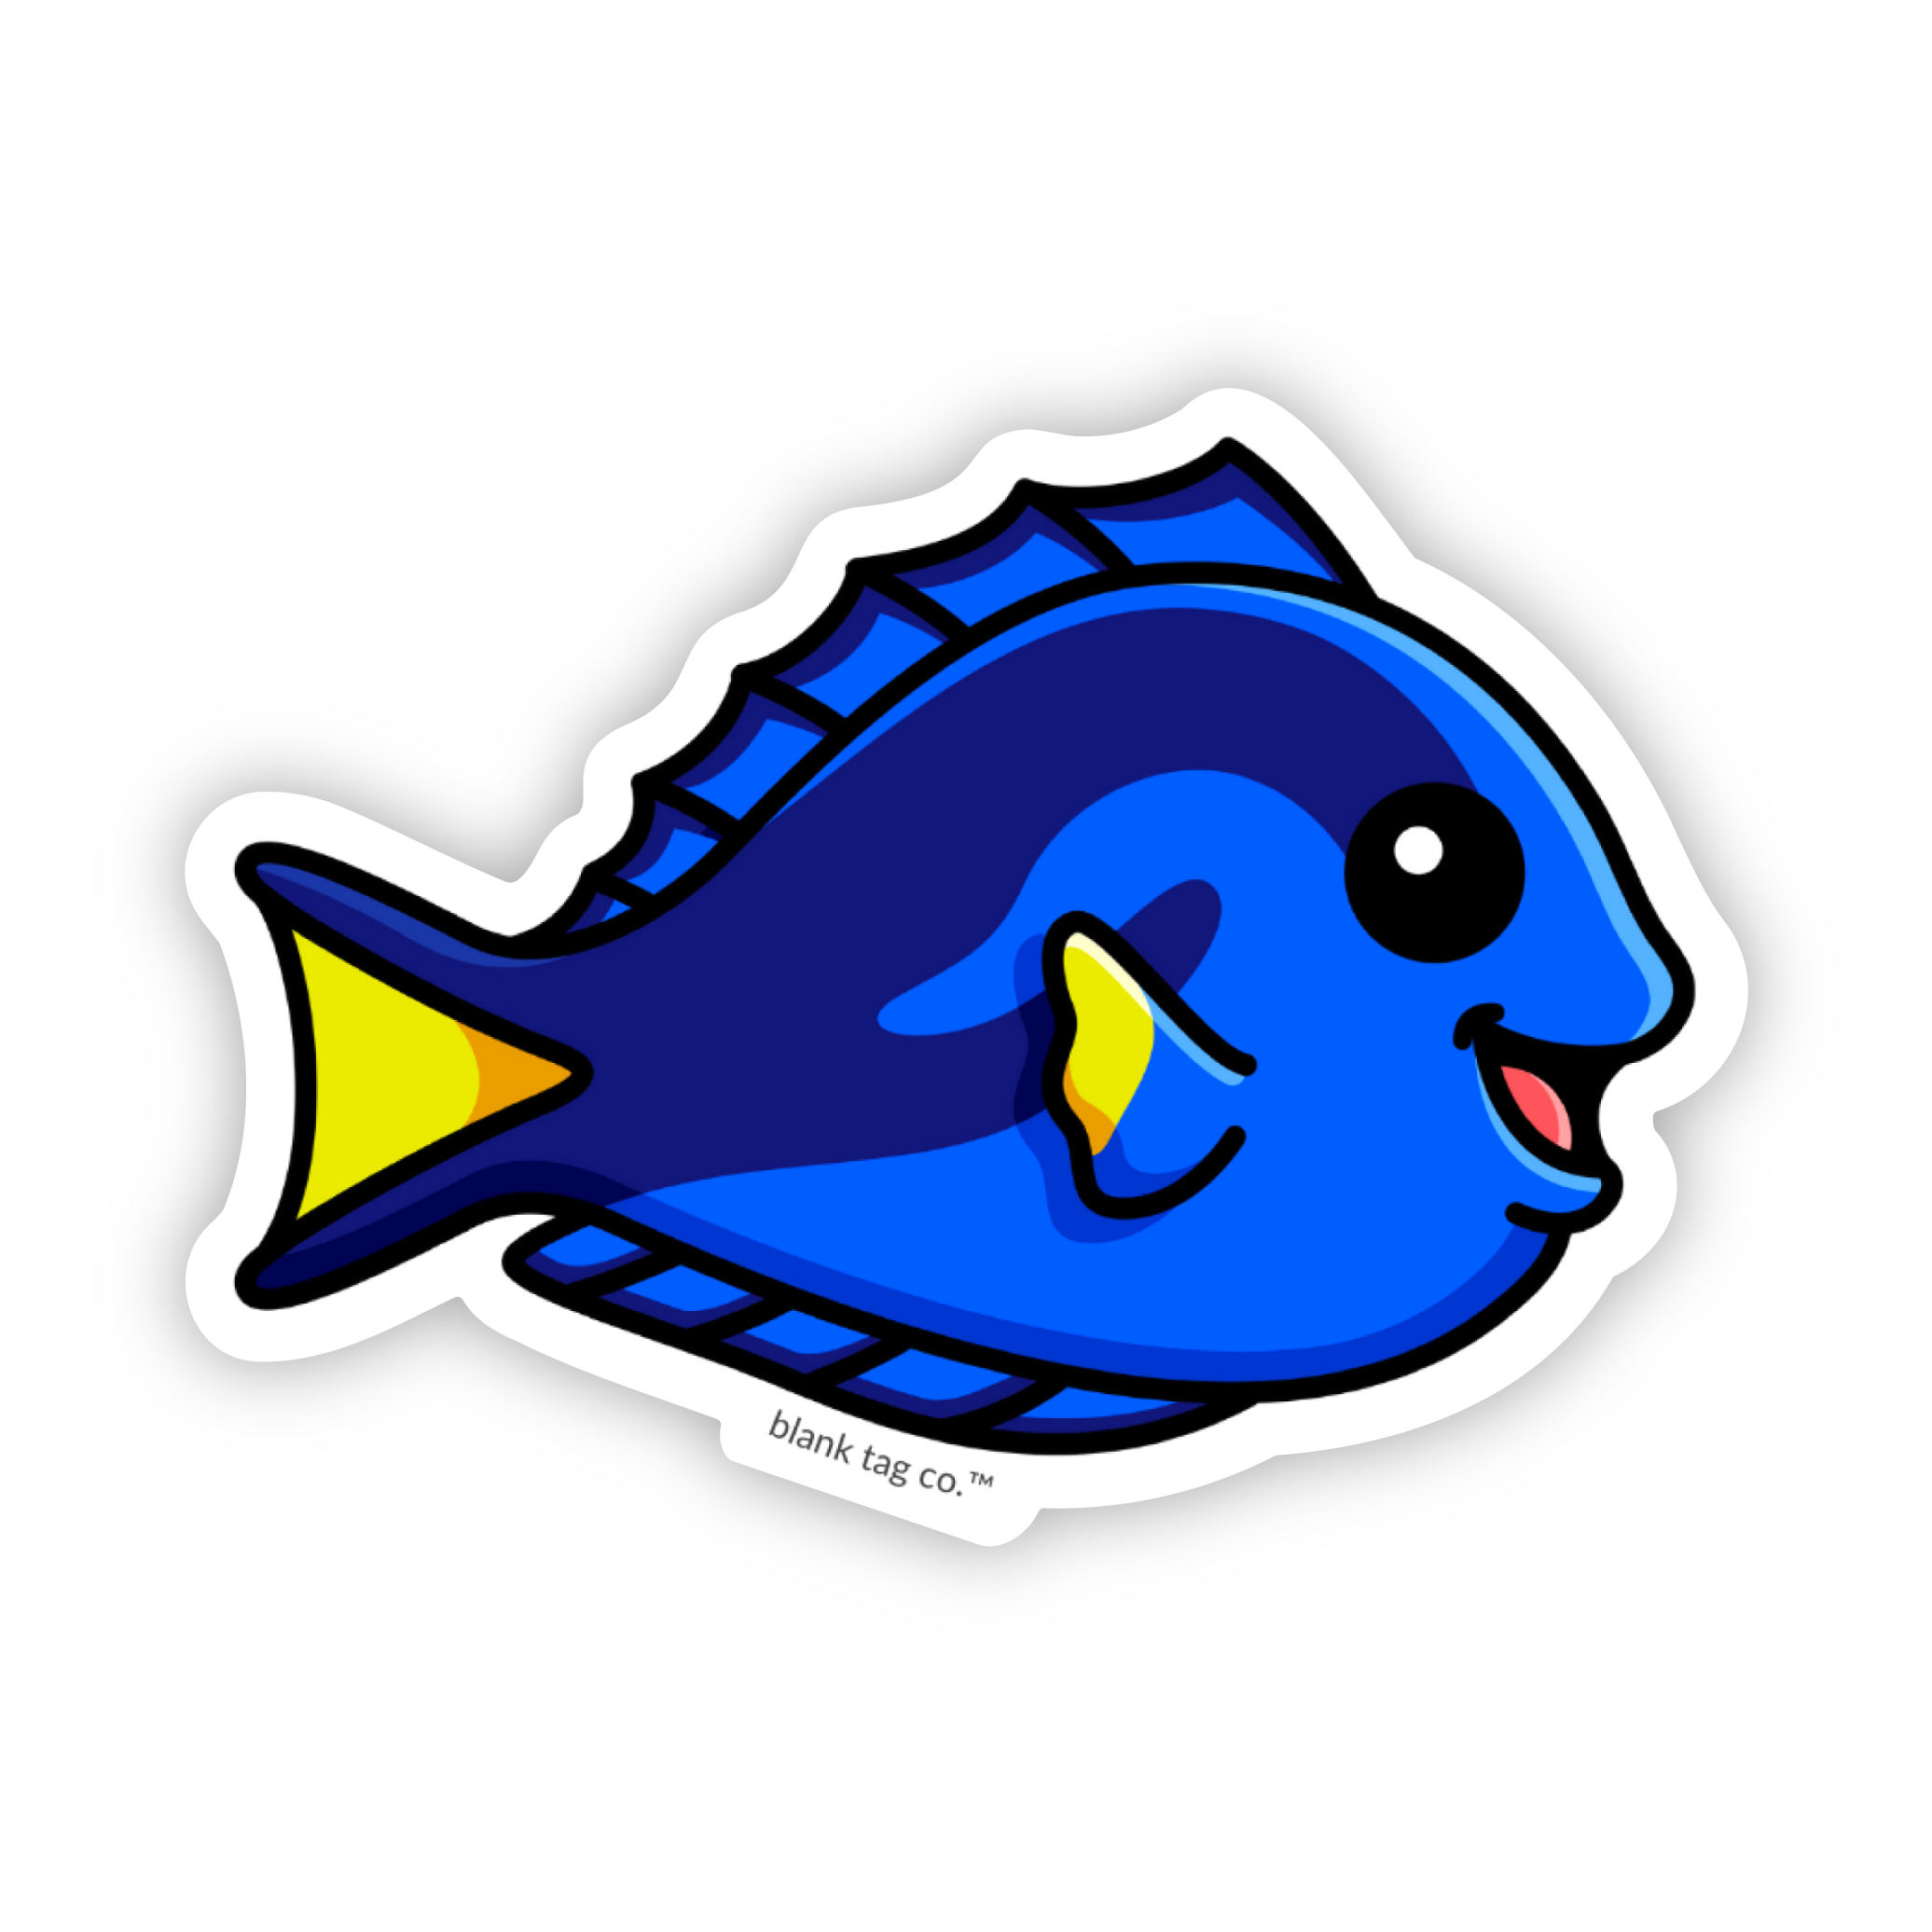 The Blue Tang Sticker